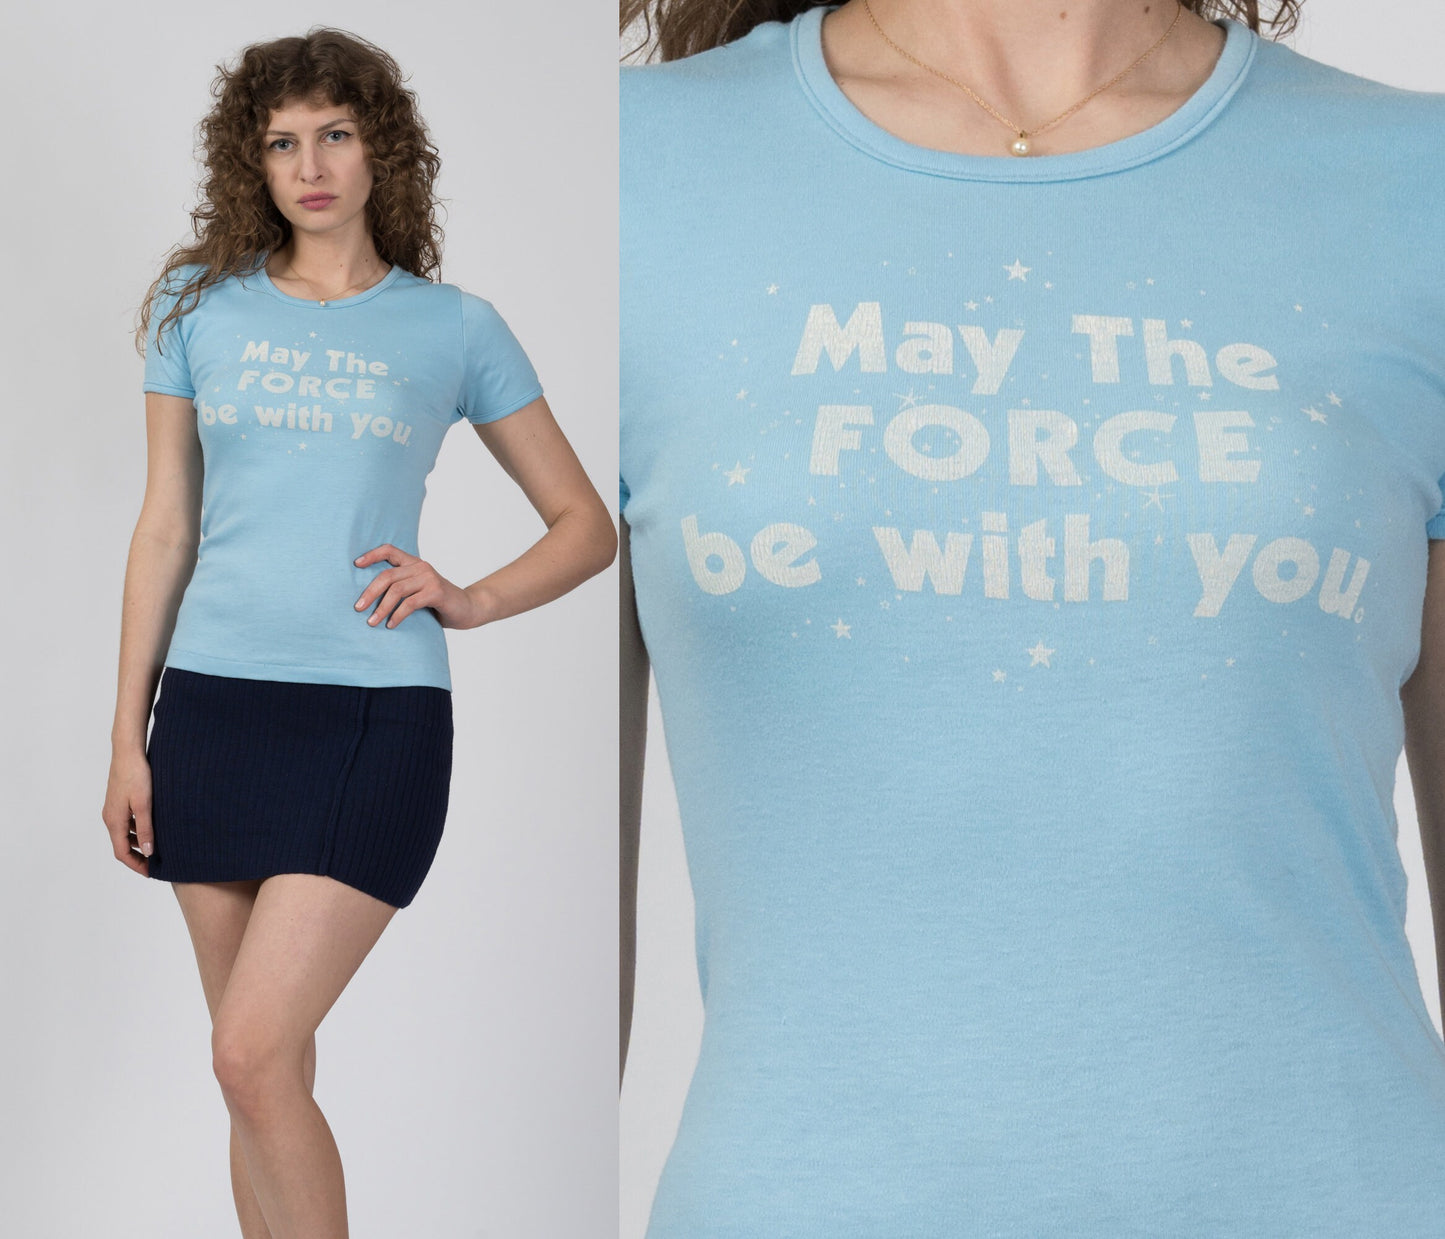 70s 80s Star Wars "May The Force Be With You" Fitted T Shirt - Small to Medium 